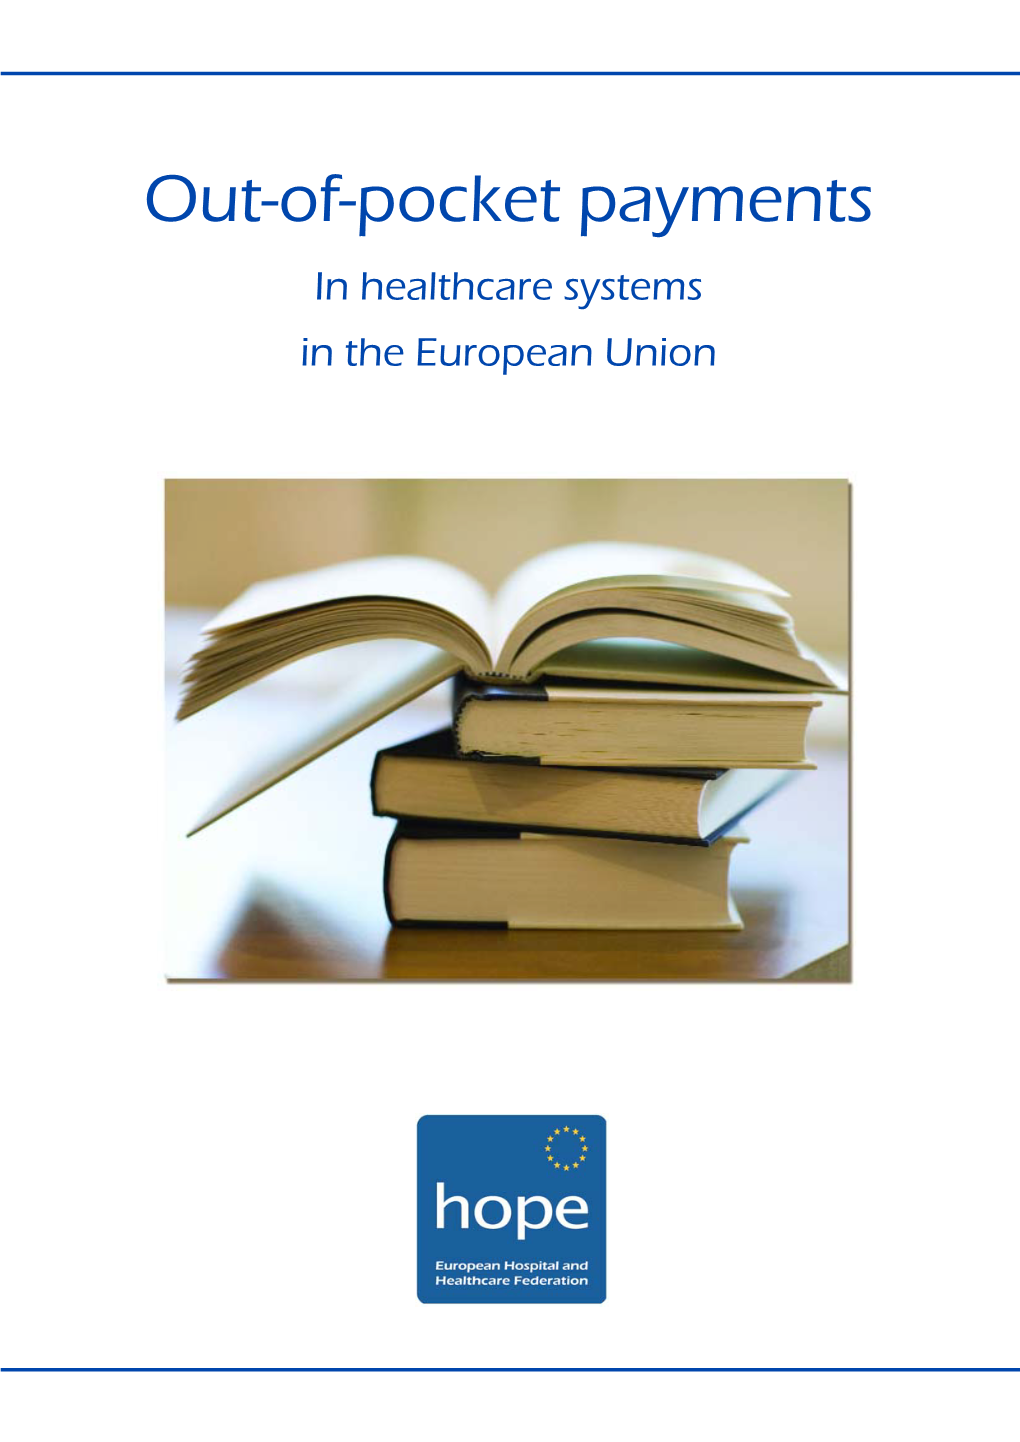 Out-Of-Pocket Payments in Healthcare Systems in the European Union HOPE - European Hospital and Healthcare Federation